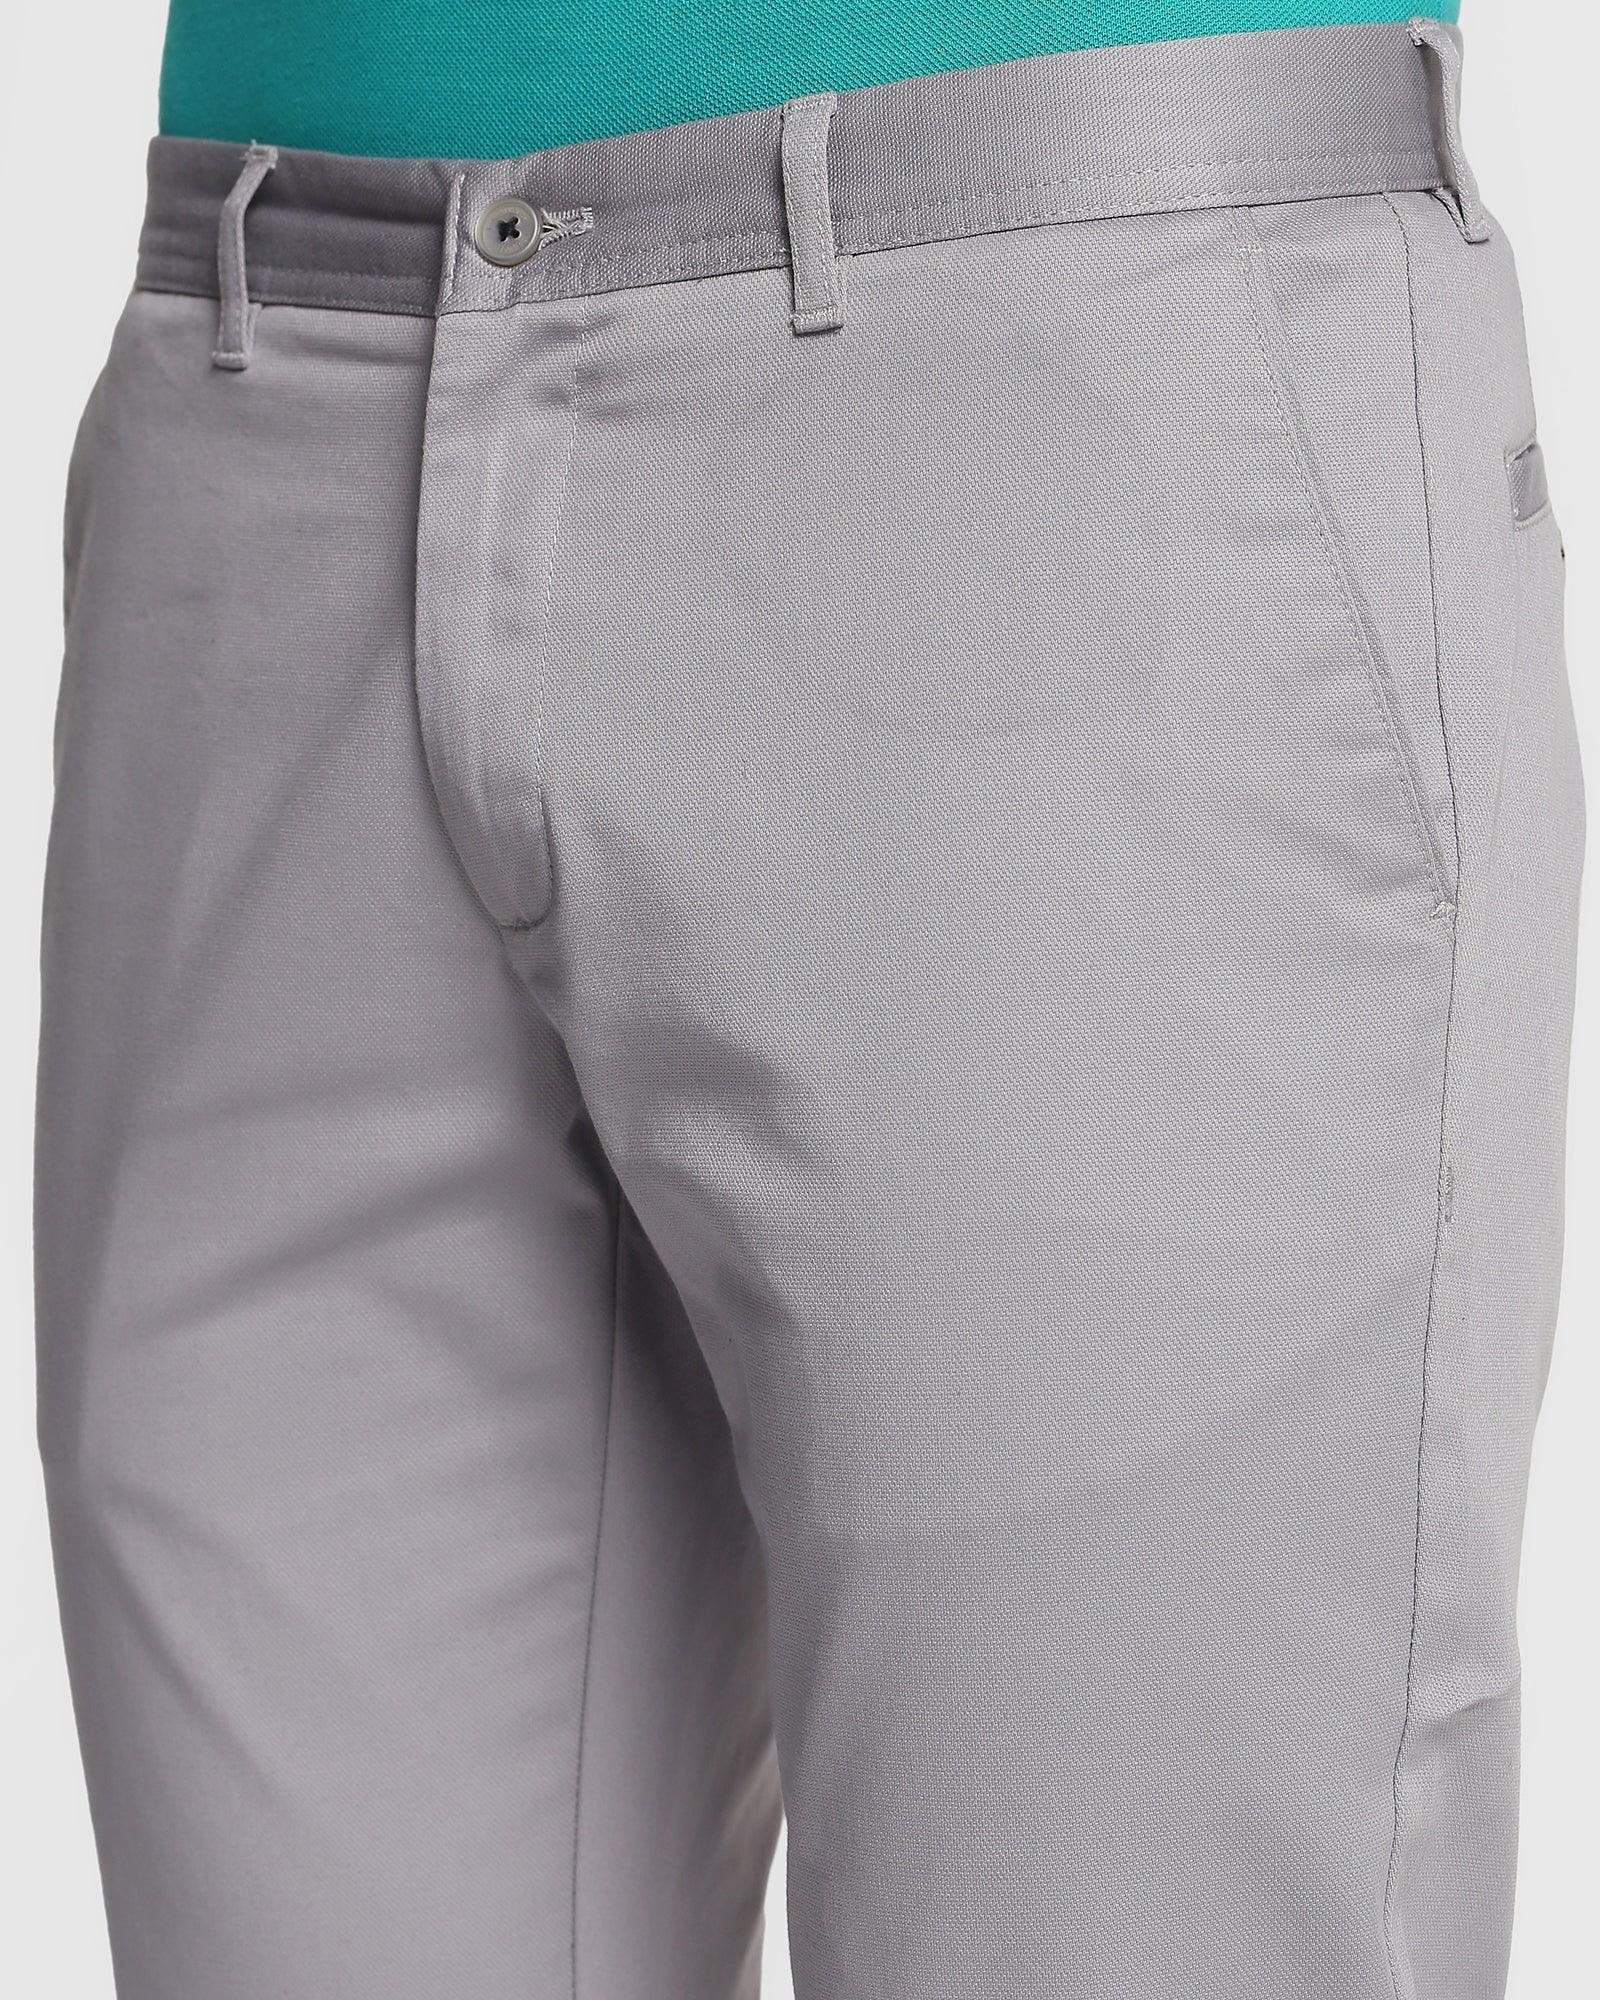 Slim Fit B-91 Casual Grey Textured Khakis - Eve